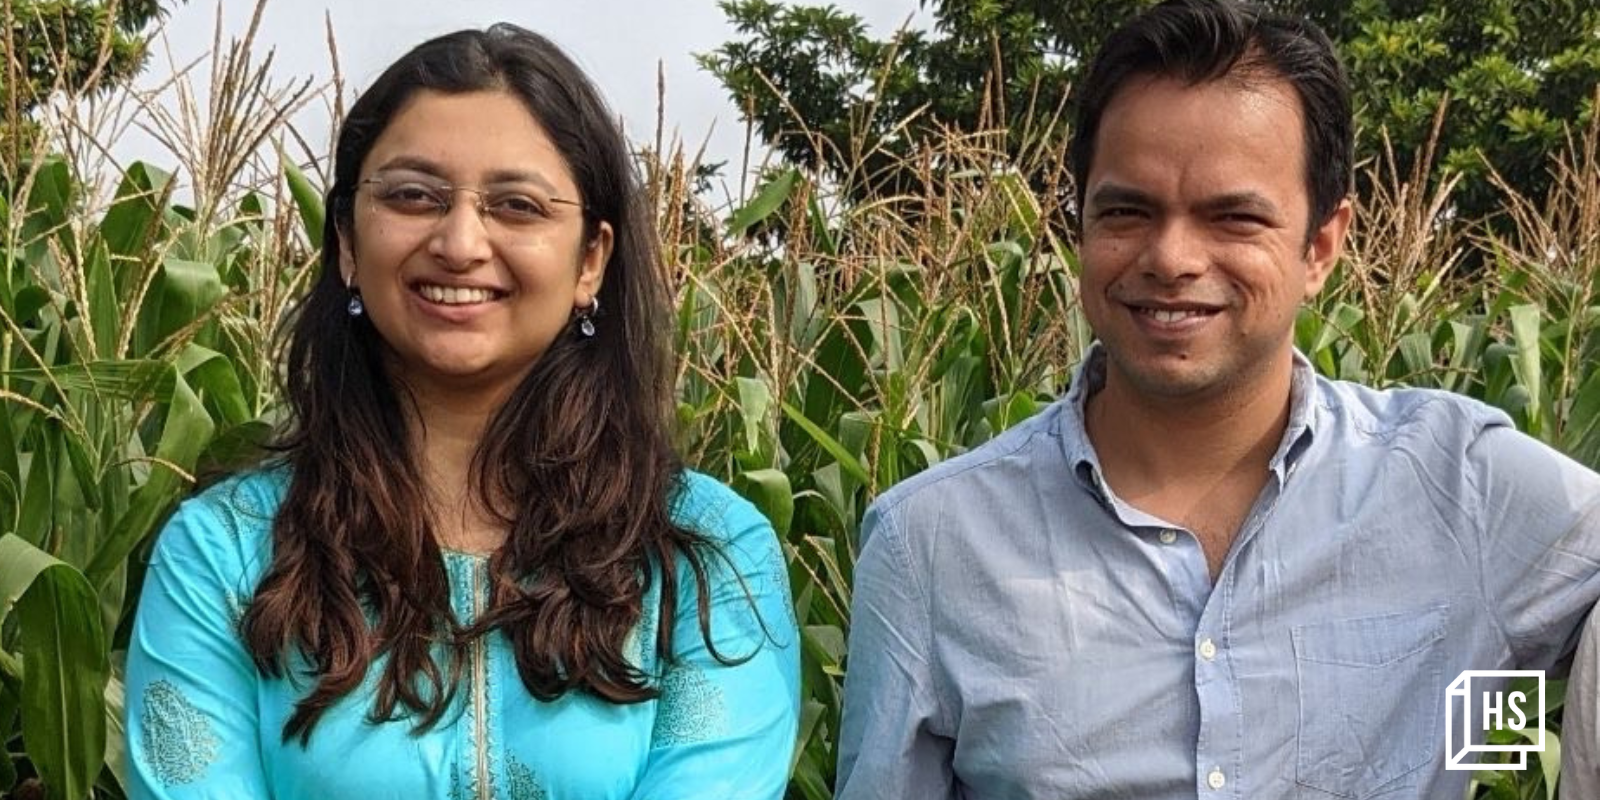 How this woman entrepreneur built BharatAgri from ground up to empower farmers digitally